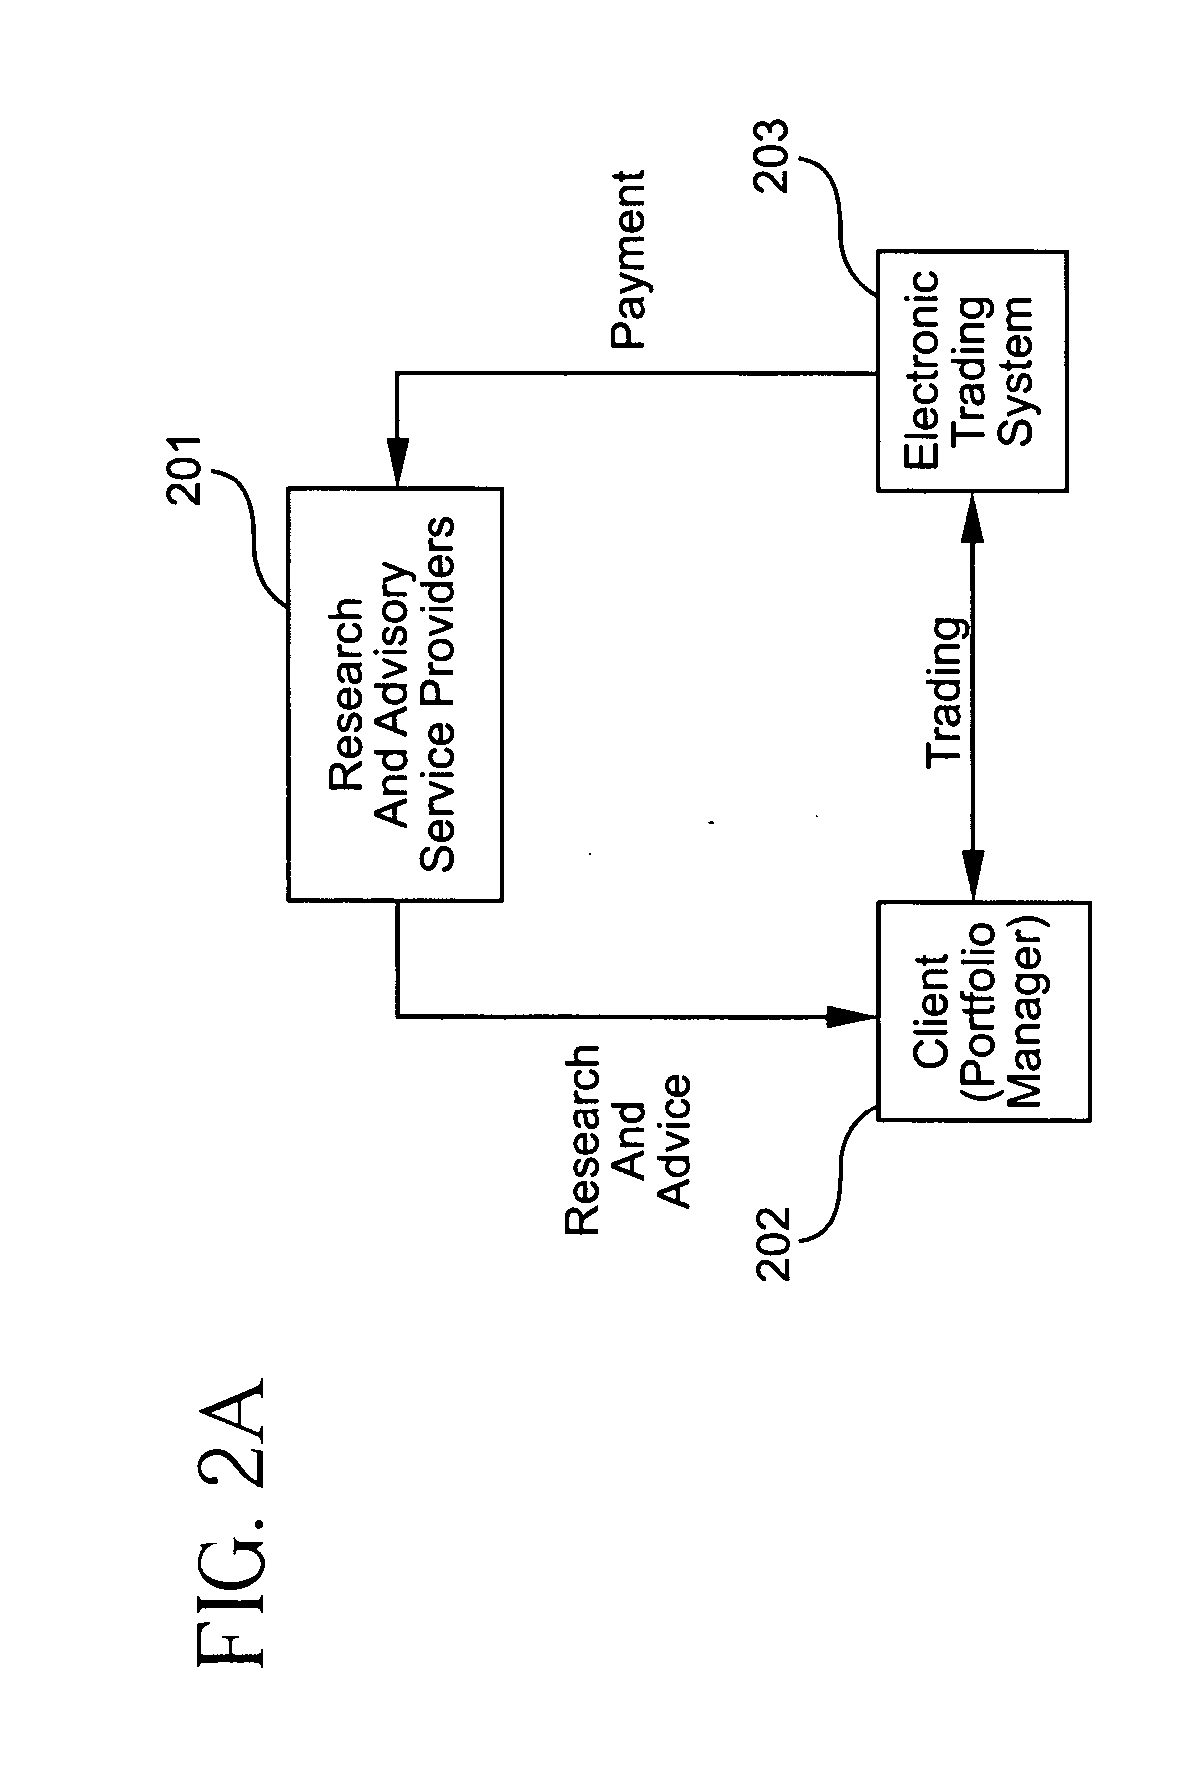 Method of managing research/advisory service provider payments